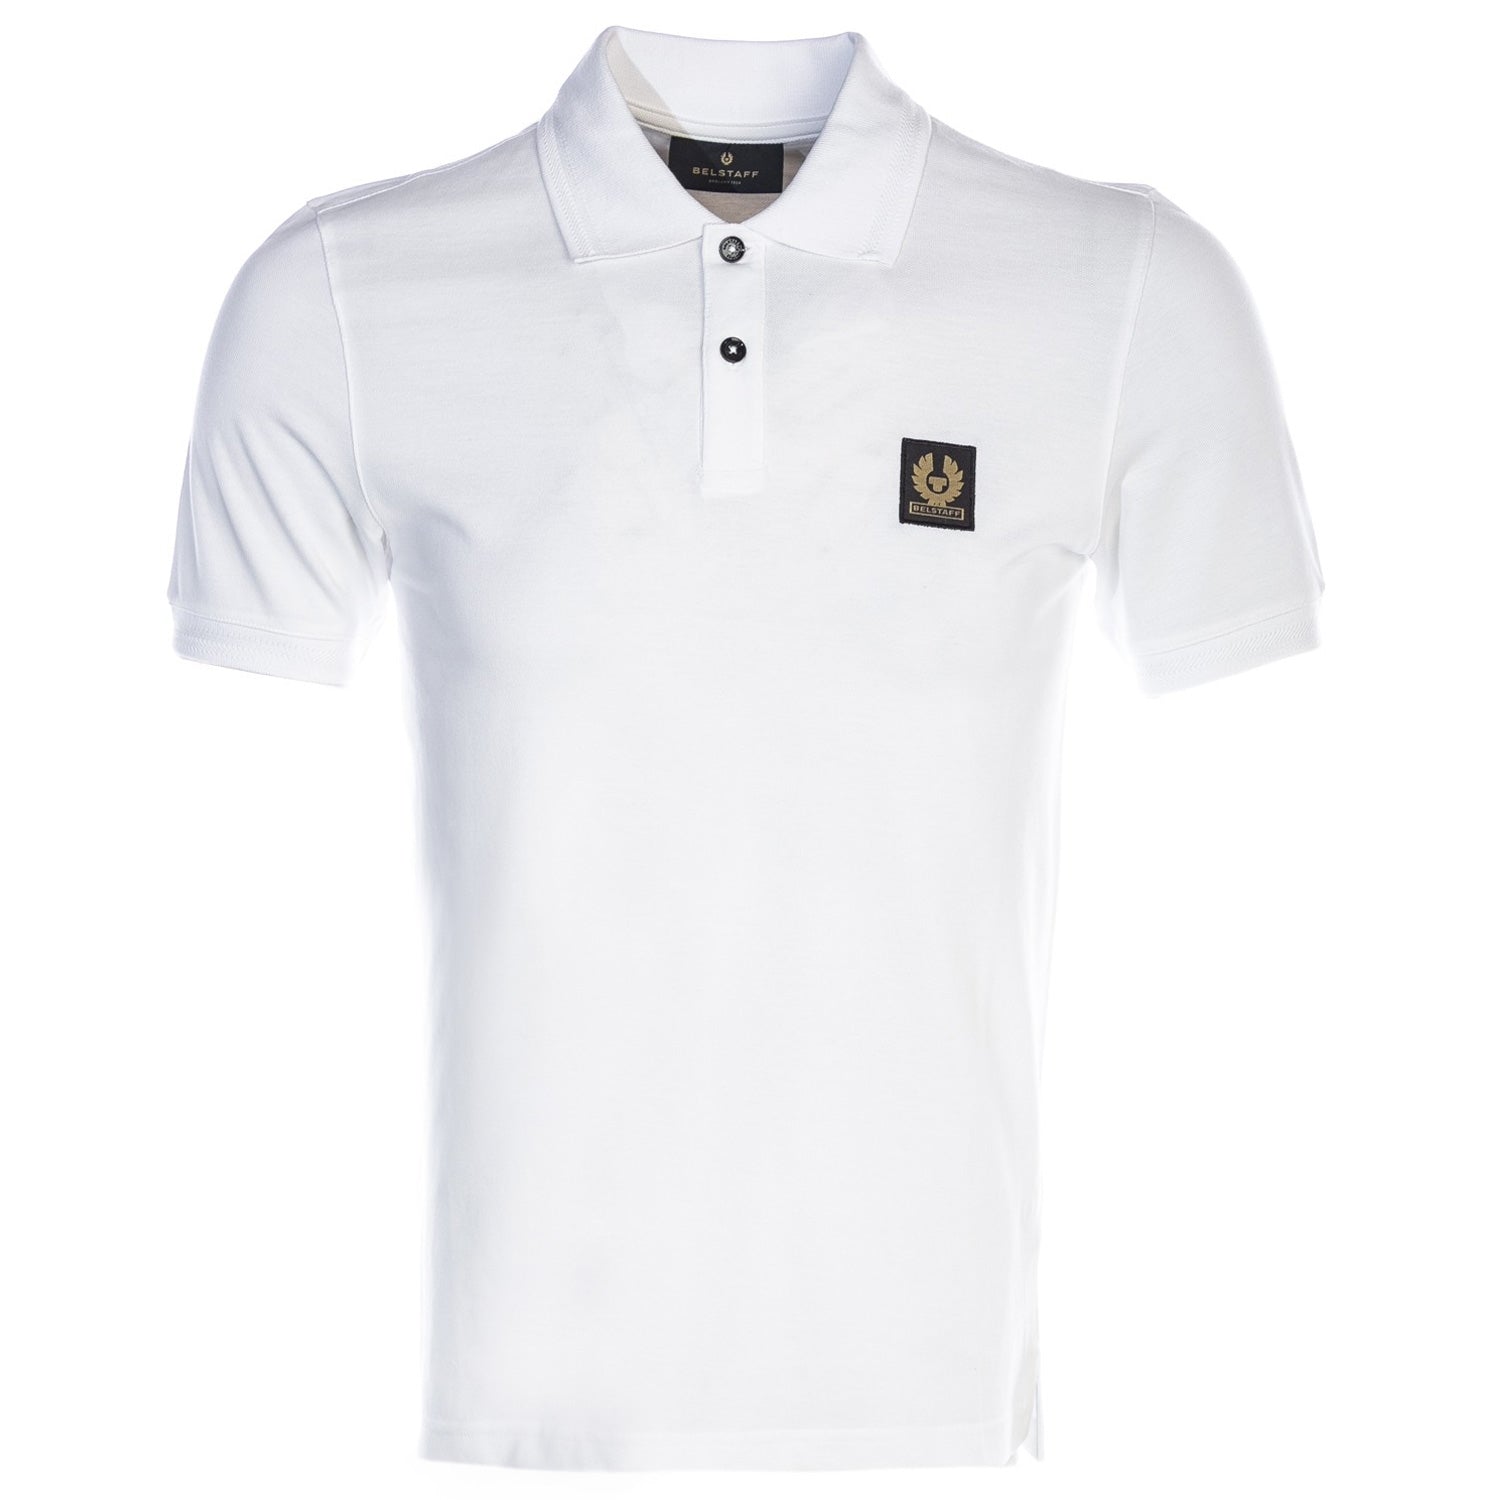 Belstaff Classic Short Sleeve Polo Shirt in White